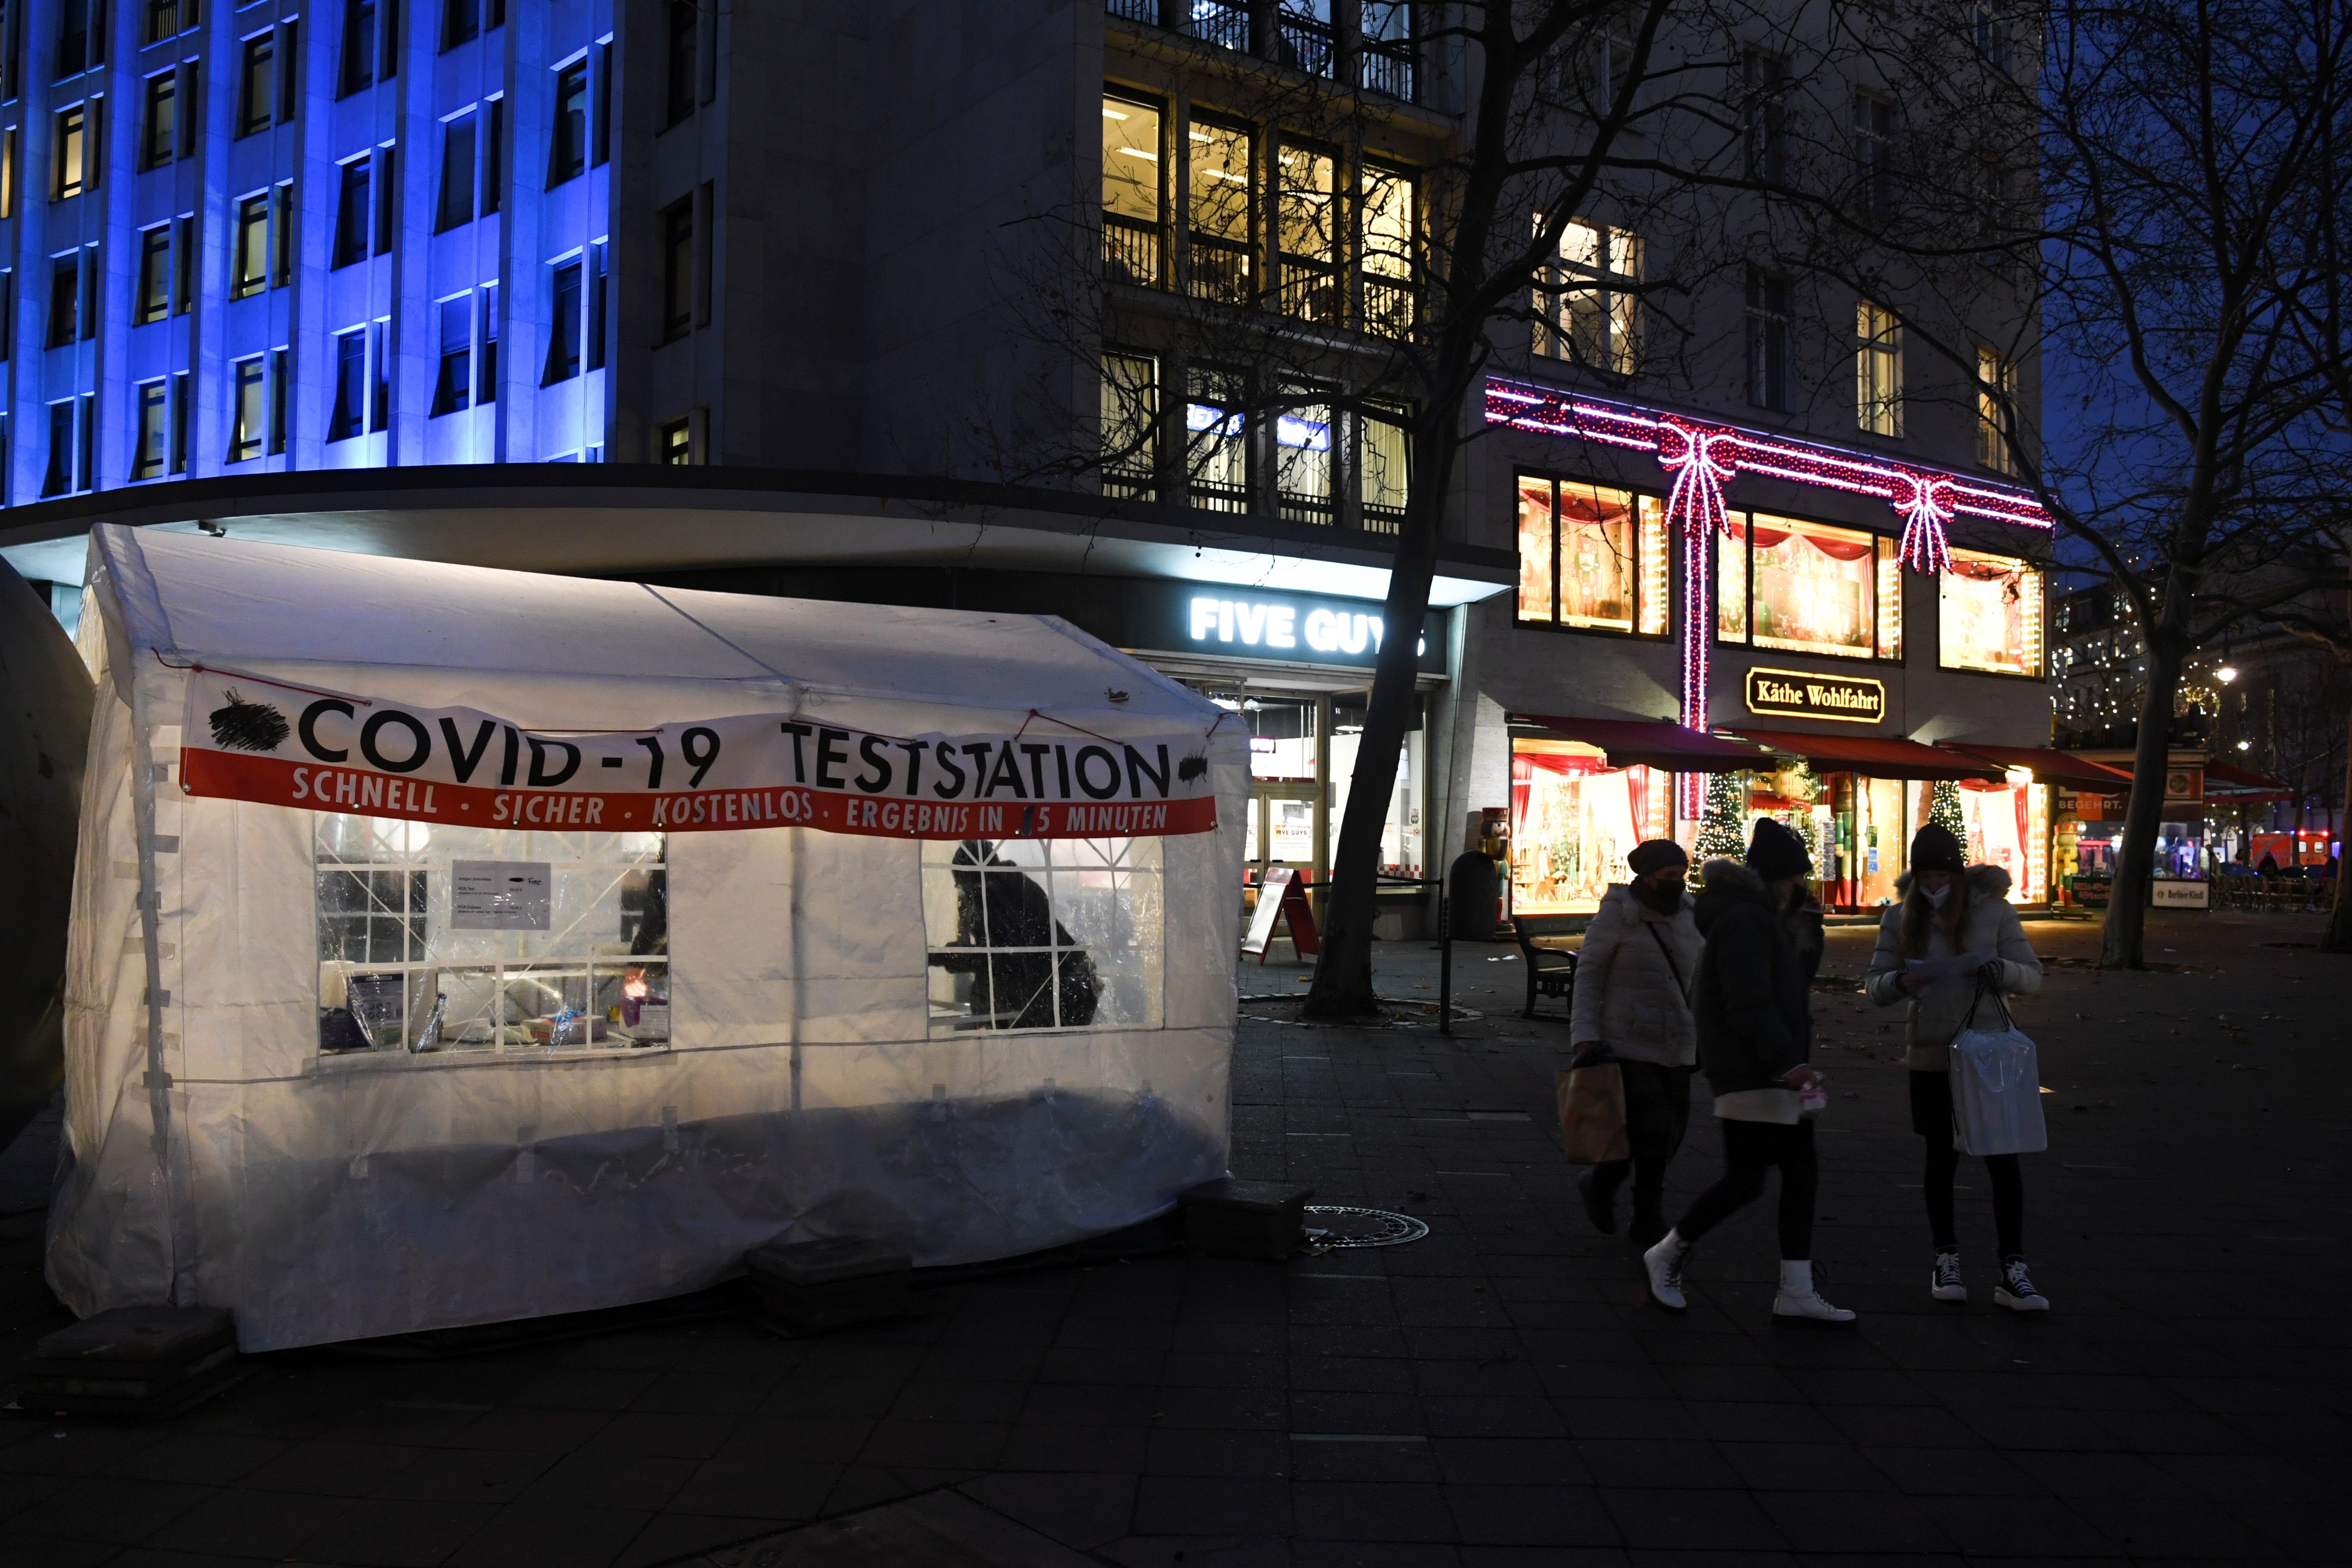 People walk by a COVID-19 testing station on the shopping street Kurfuerstendamm, amid the coronavirus disease (COVID-19) pandemic, in Berlin, Germany, December 1, 2021. REUTERS/Annegret Hilse